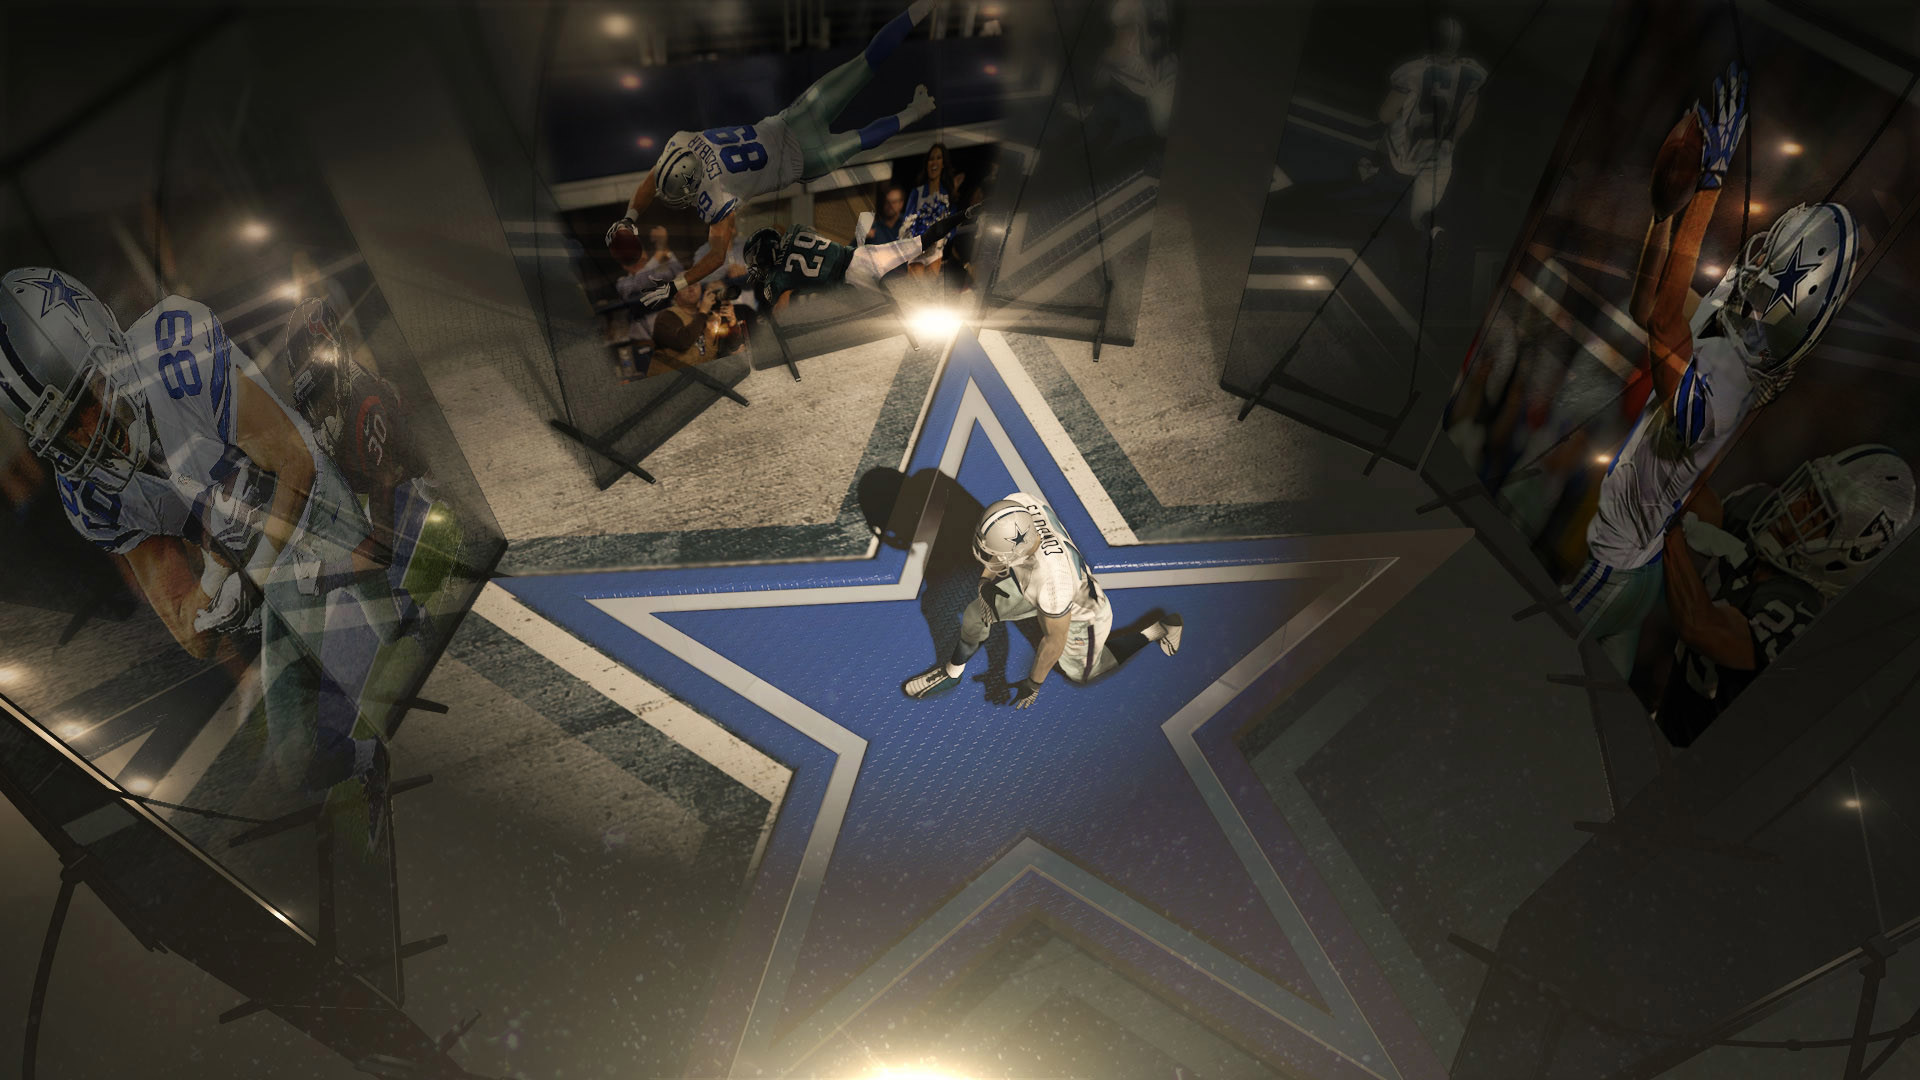 1920x1080 Wallpapers Of Dallas Cowboys Wallpapers) – HD Wallpapers